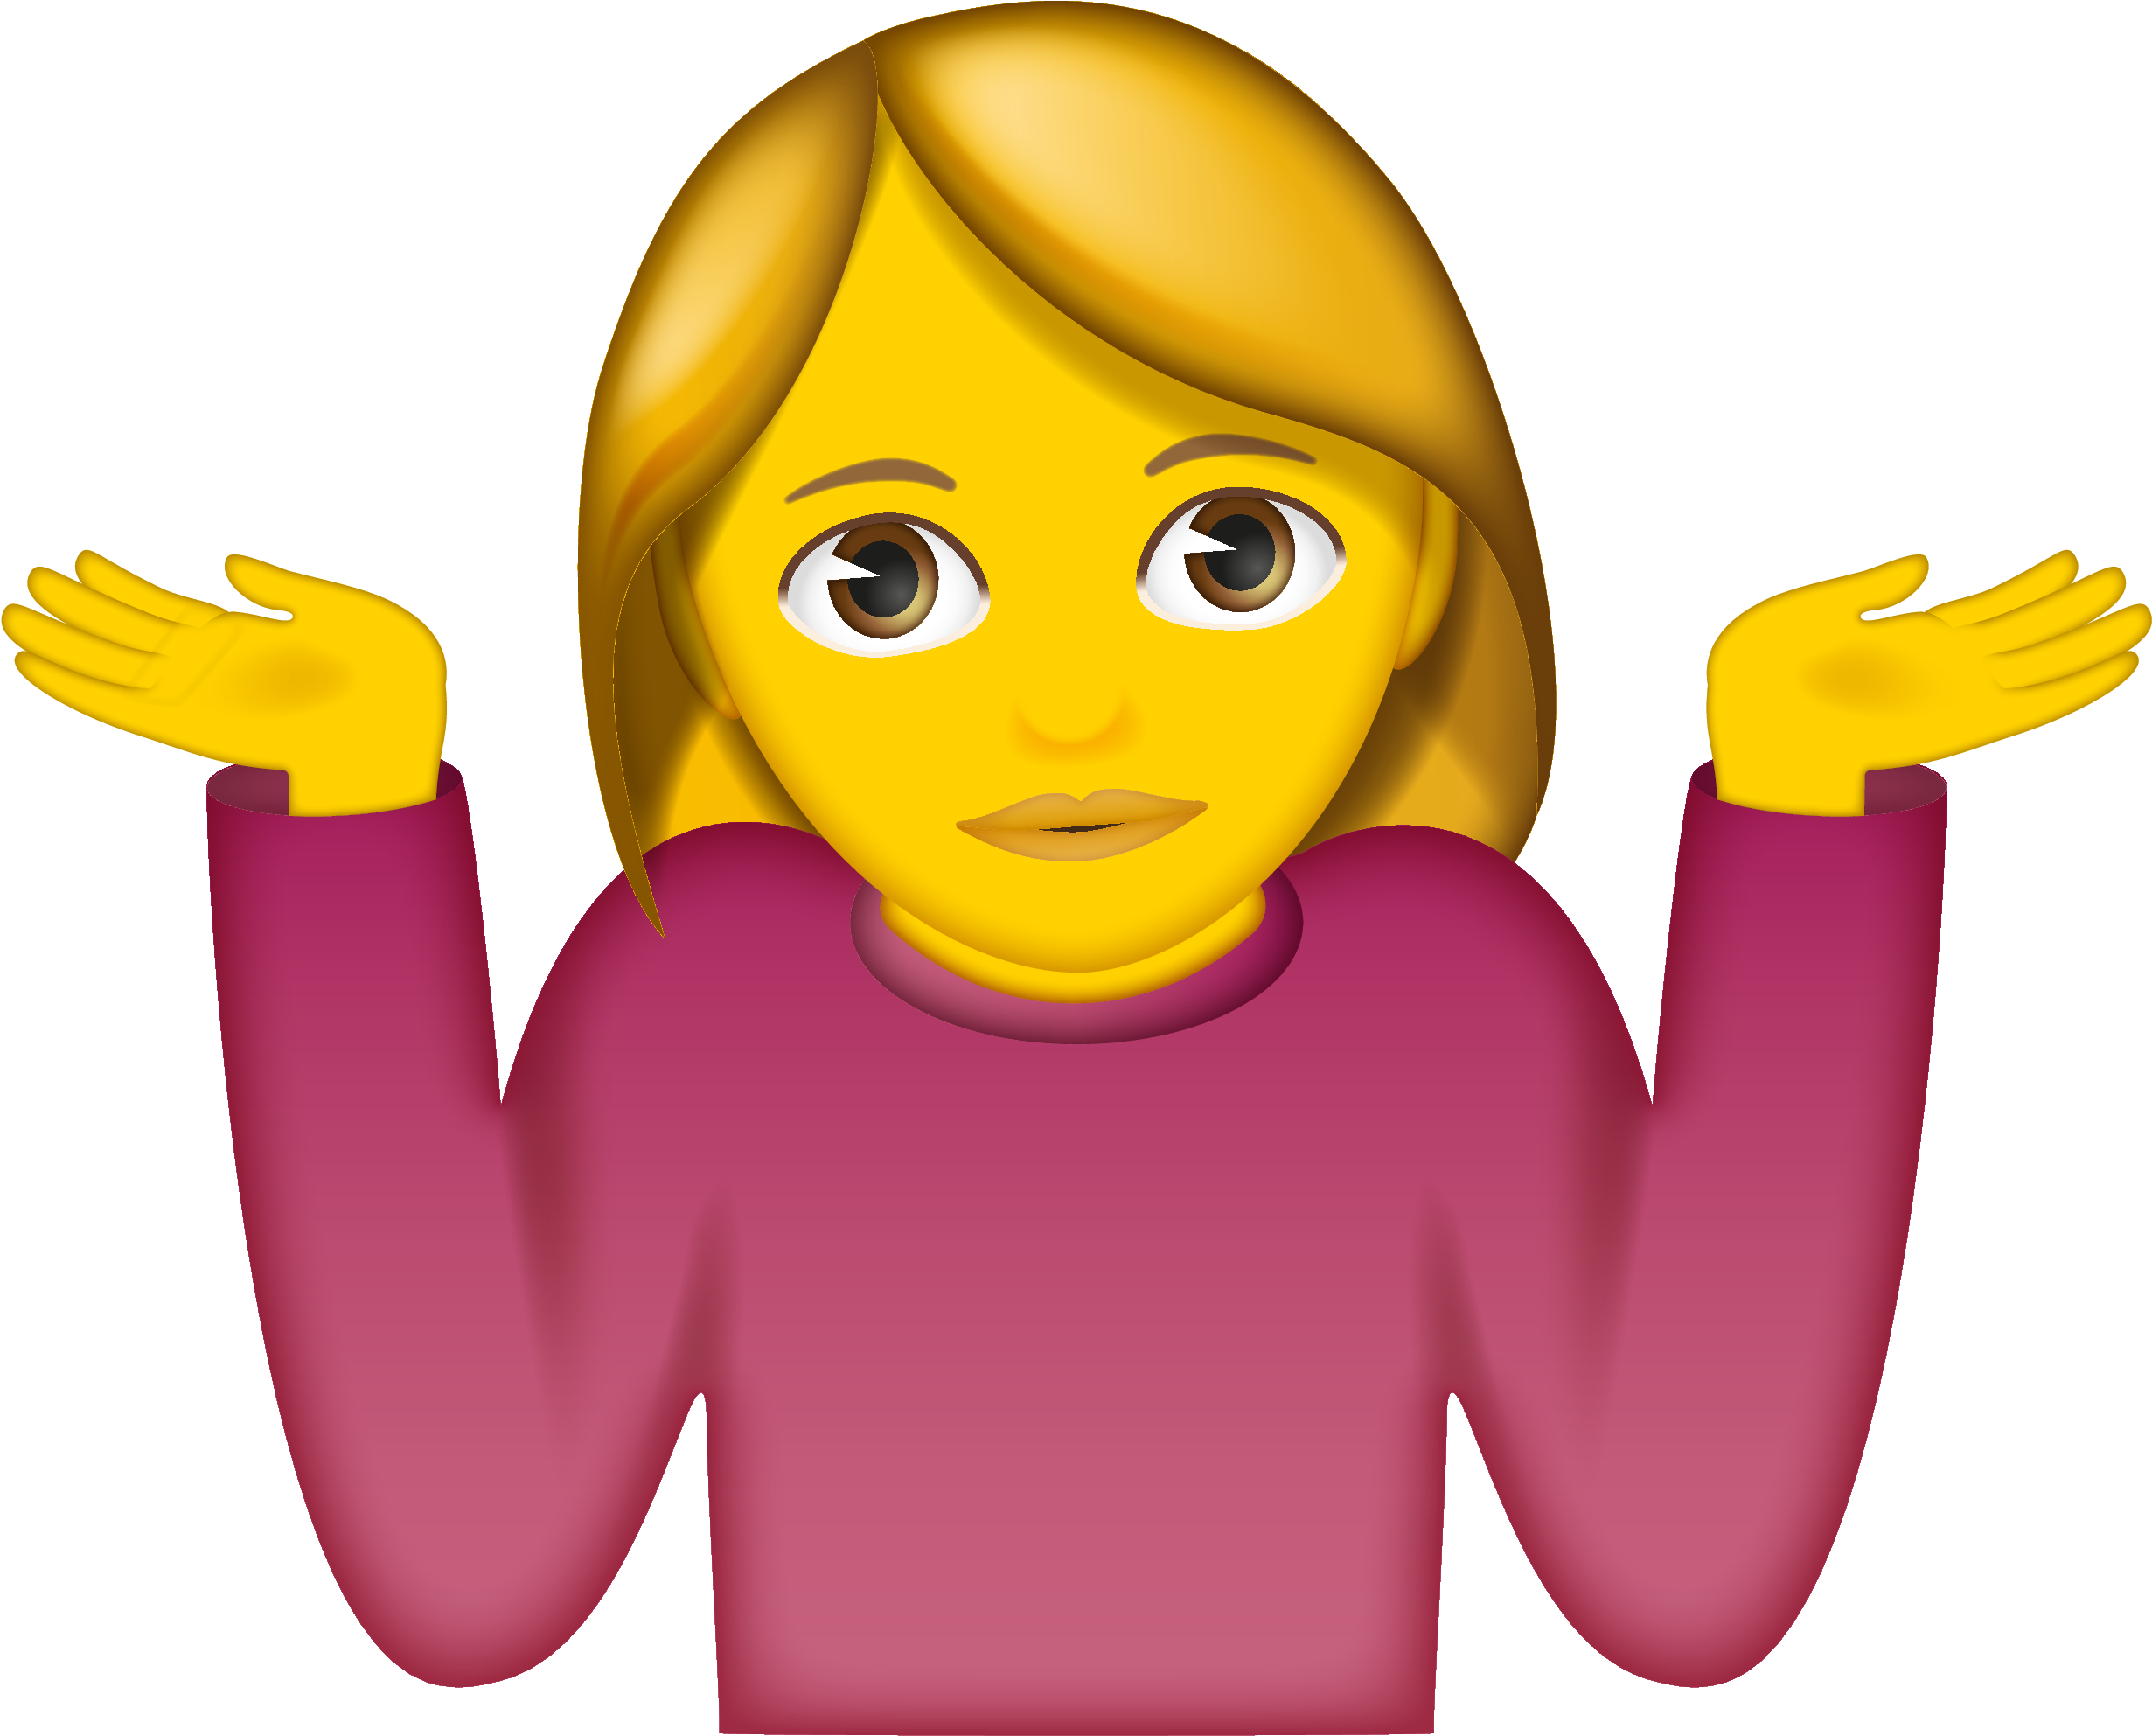 A Cartoon Of A Woman With Her Arms Raised